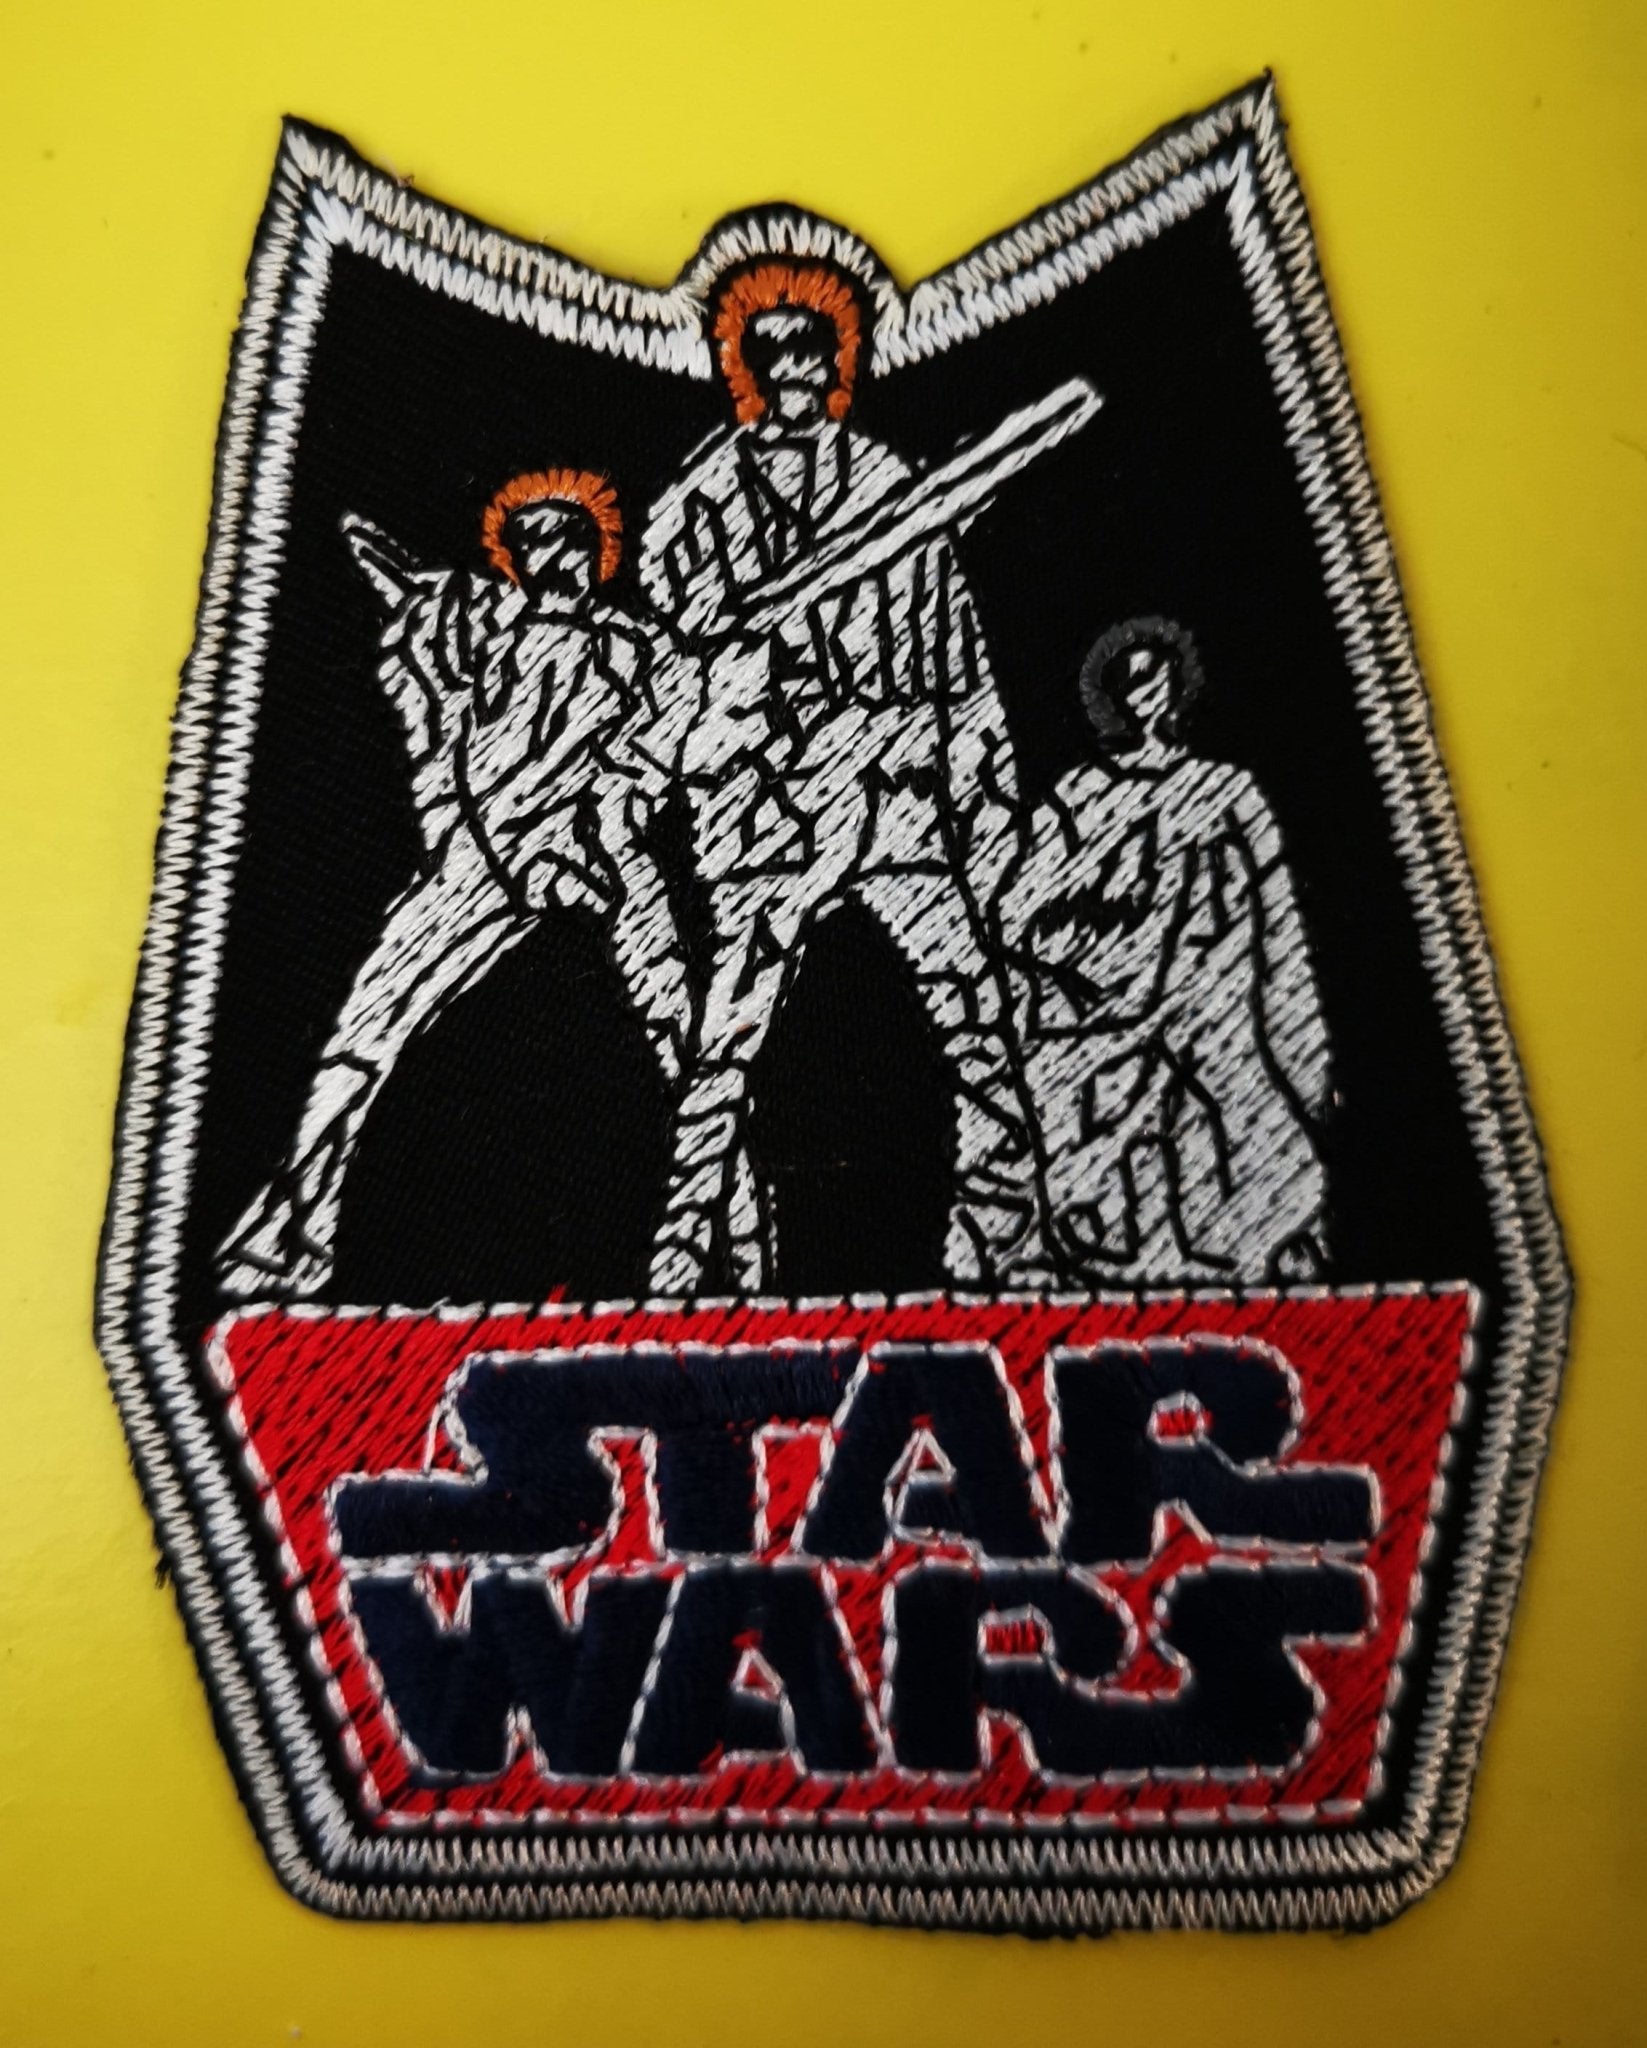 Star Wars 4 Embroidered Iron on Patch